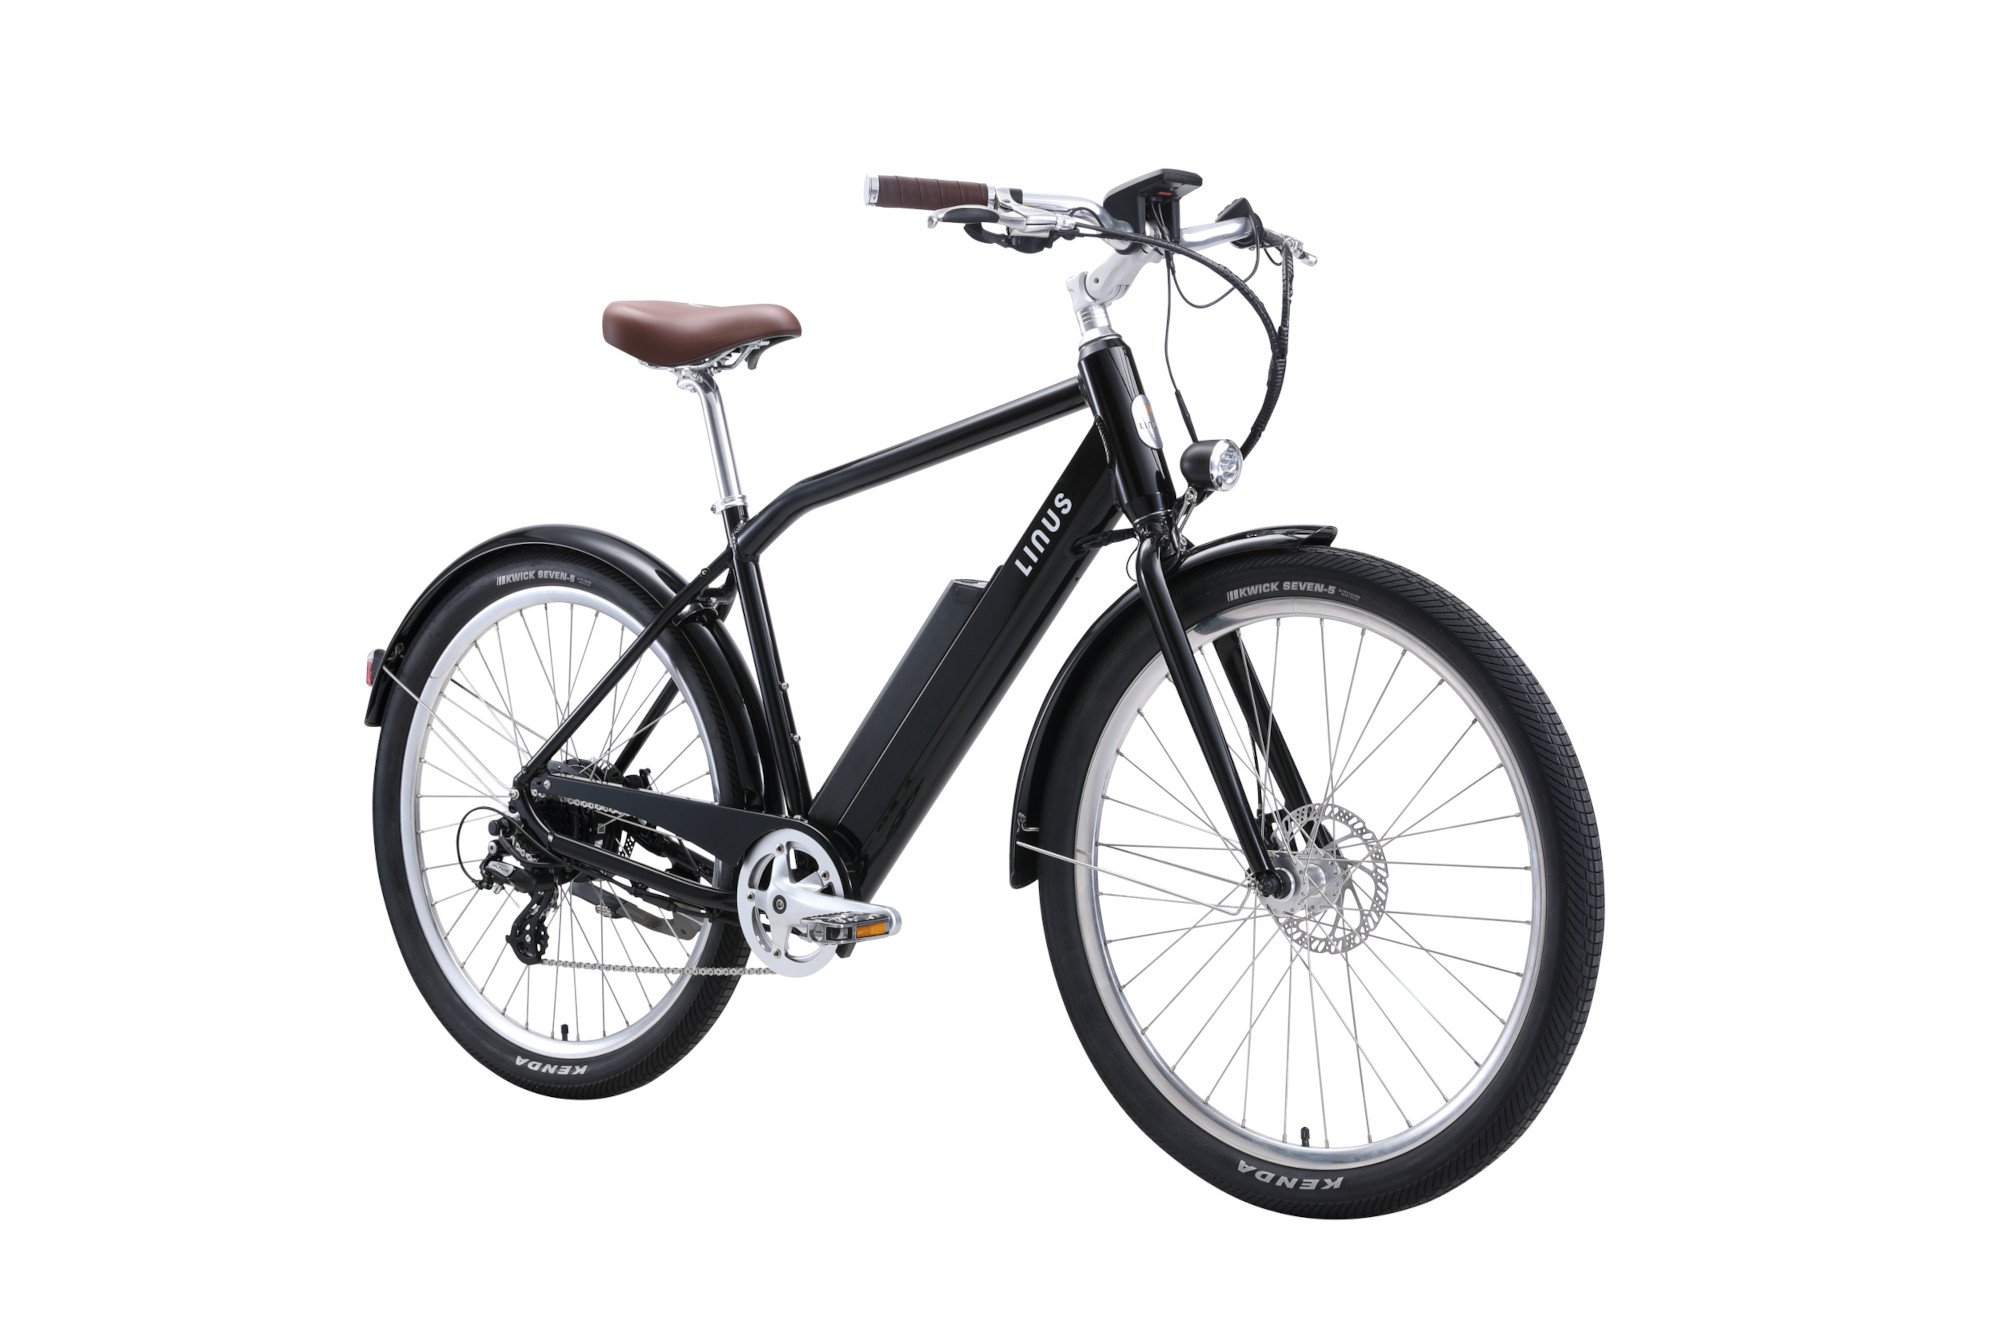 fashion-simplicity-and-affordability-traits-of-the-ero-500-e-bike-from-linus_7